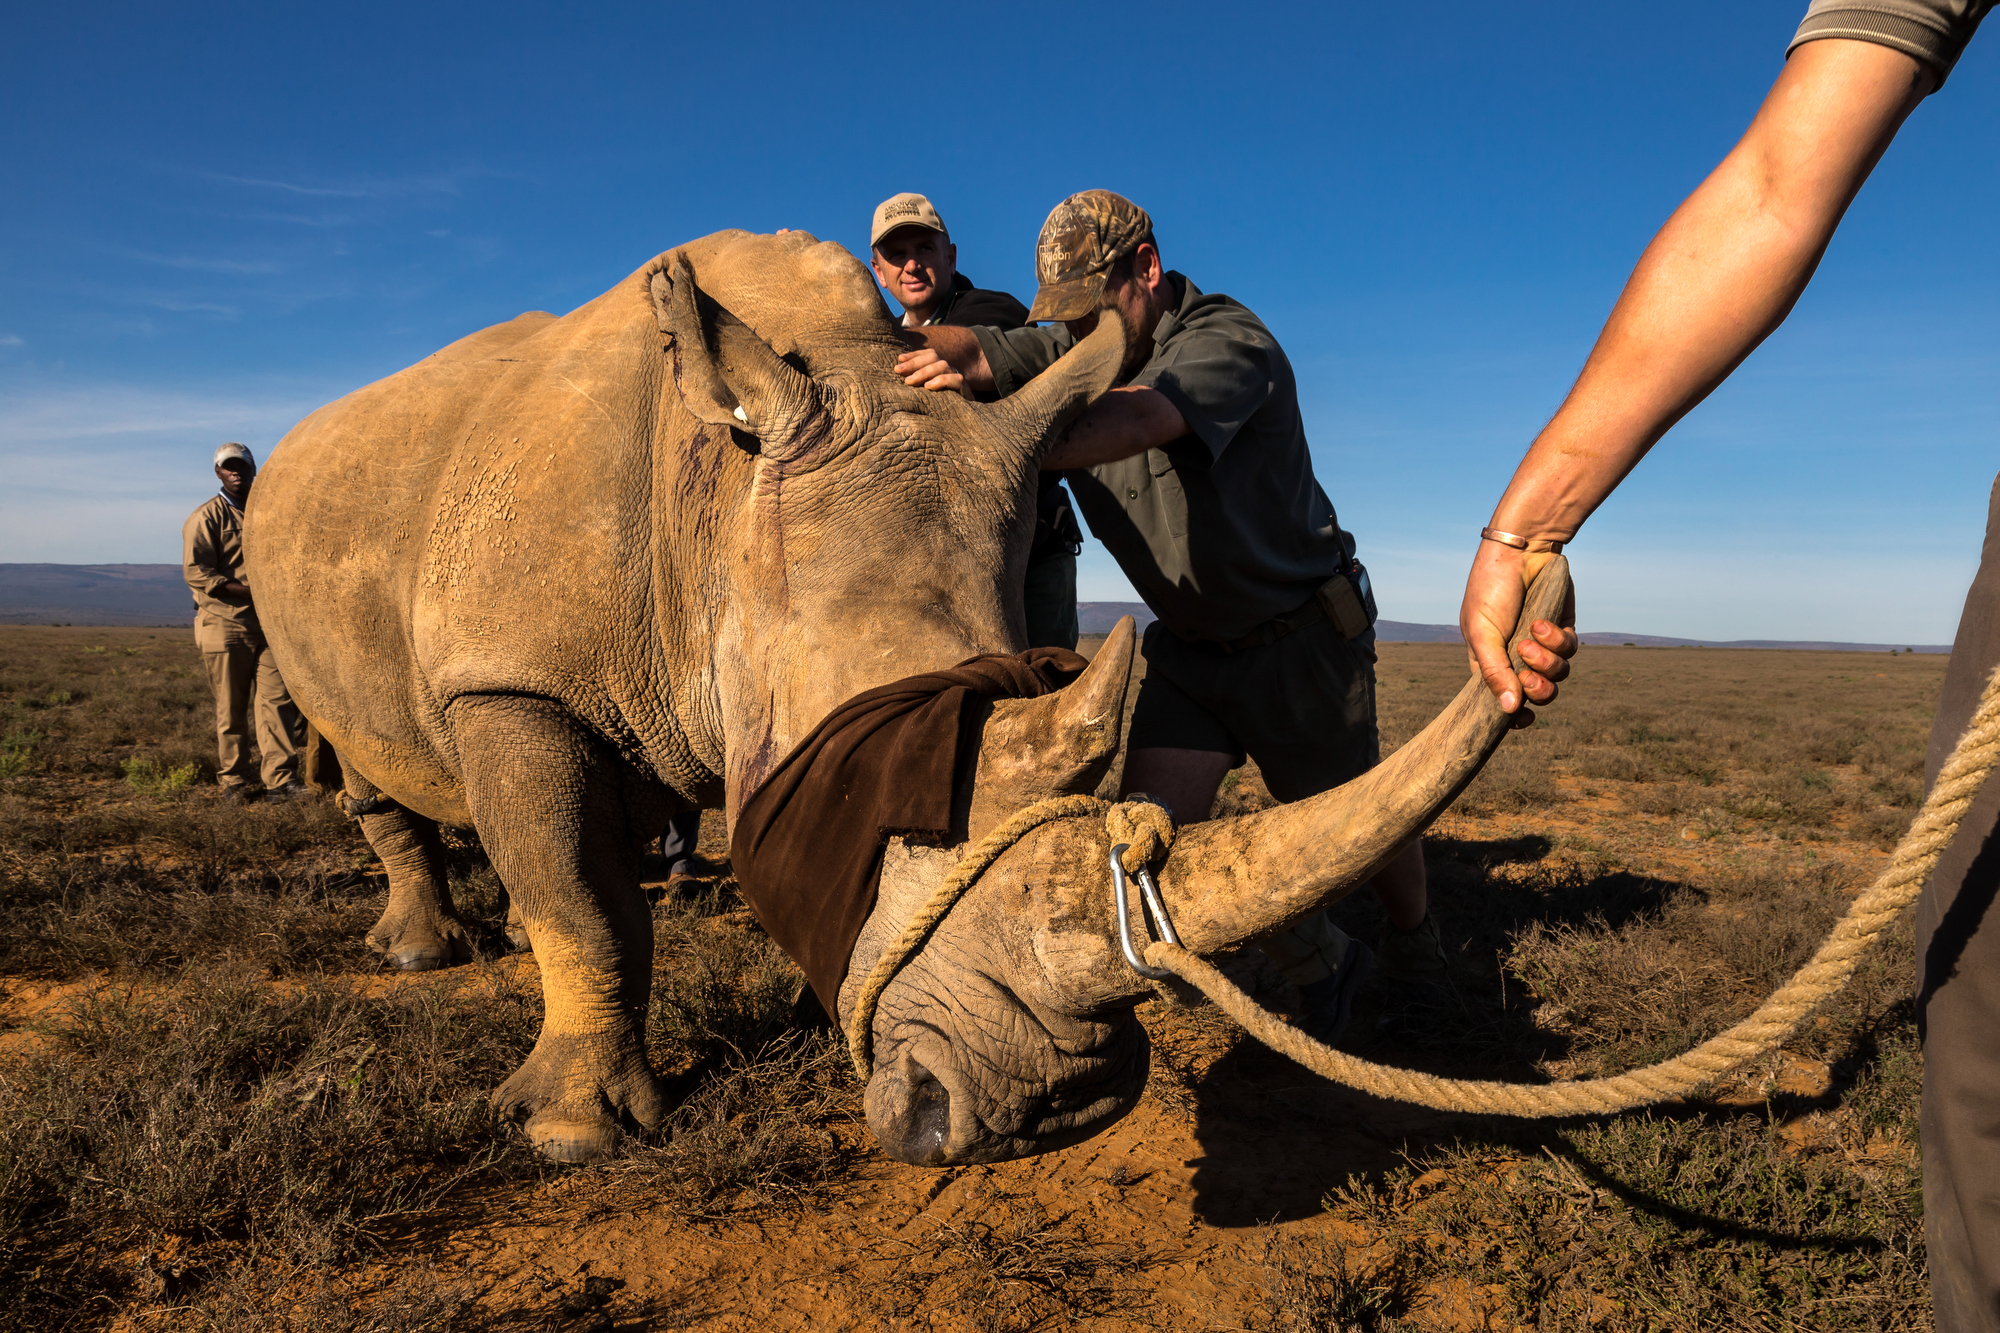 Brent Stirton, Getty Images photographer, Wildlife Photographer of the Year, Wildlife Photojournalist Award: Photo Story, First place, The Deadly Rhino Horn Trade, Memorial to a species: Ezulu Game Farm, Grahamstown, South Africa, May 15, 2016.our p…